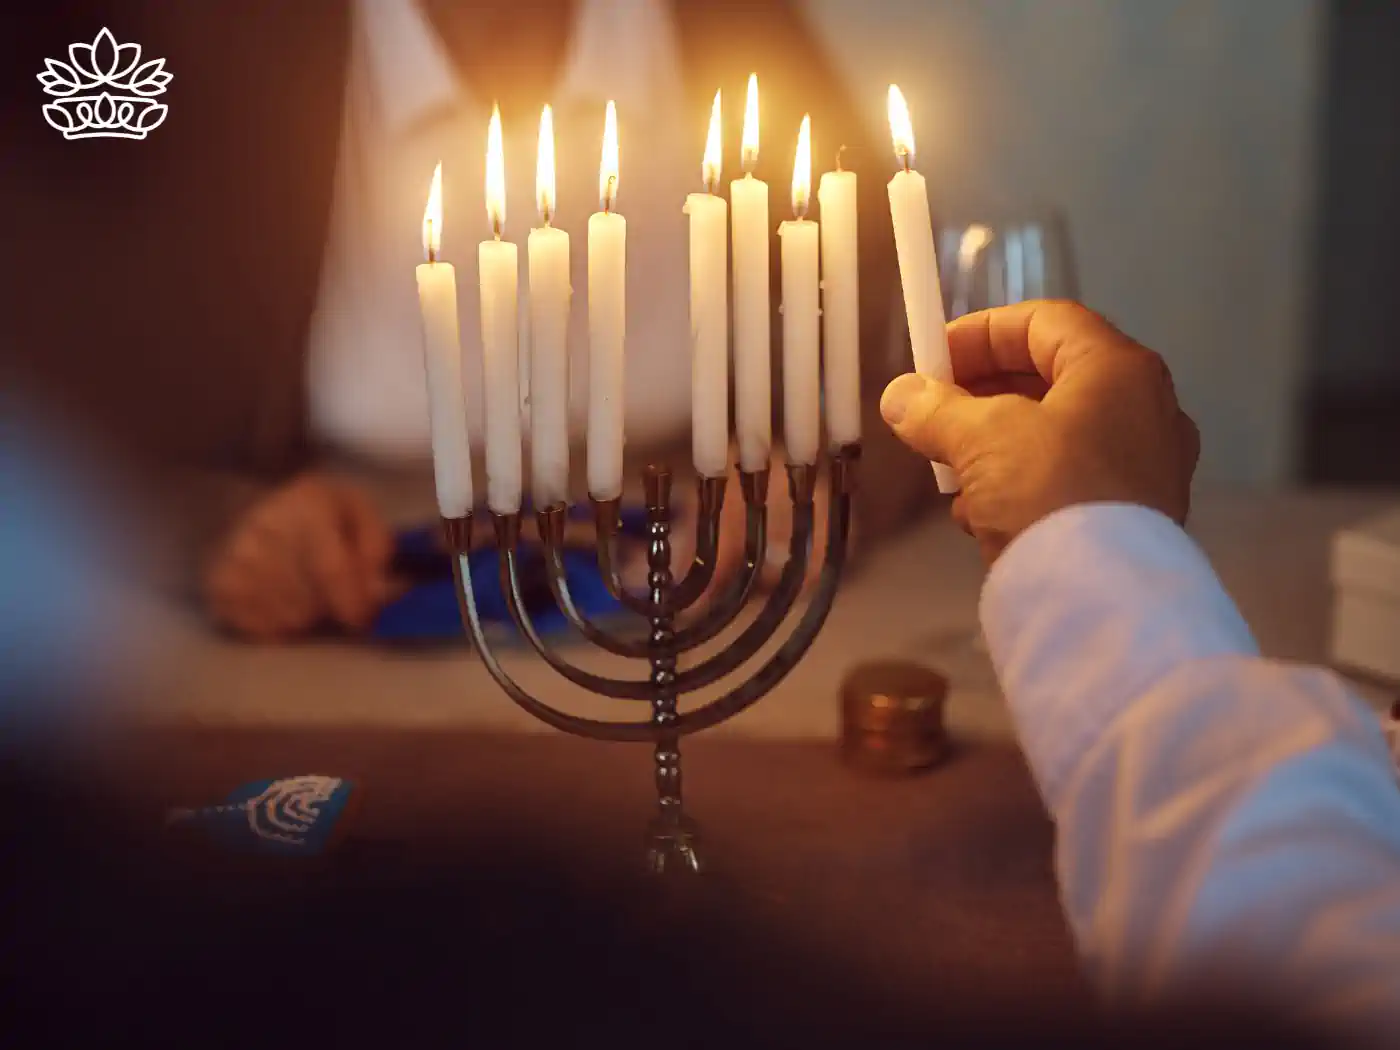 A person lighting the candles on a menorah, symbolizing the Hanukkah celebration. Fabulous Flowers and Gifts - Hanukkah Collection.